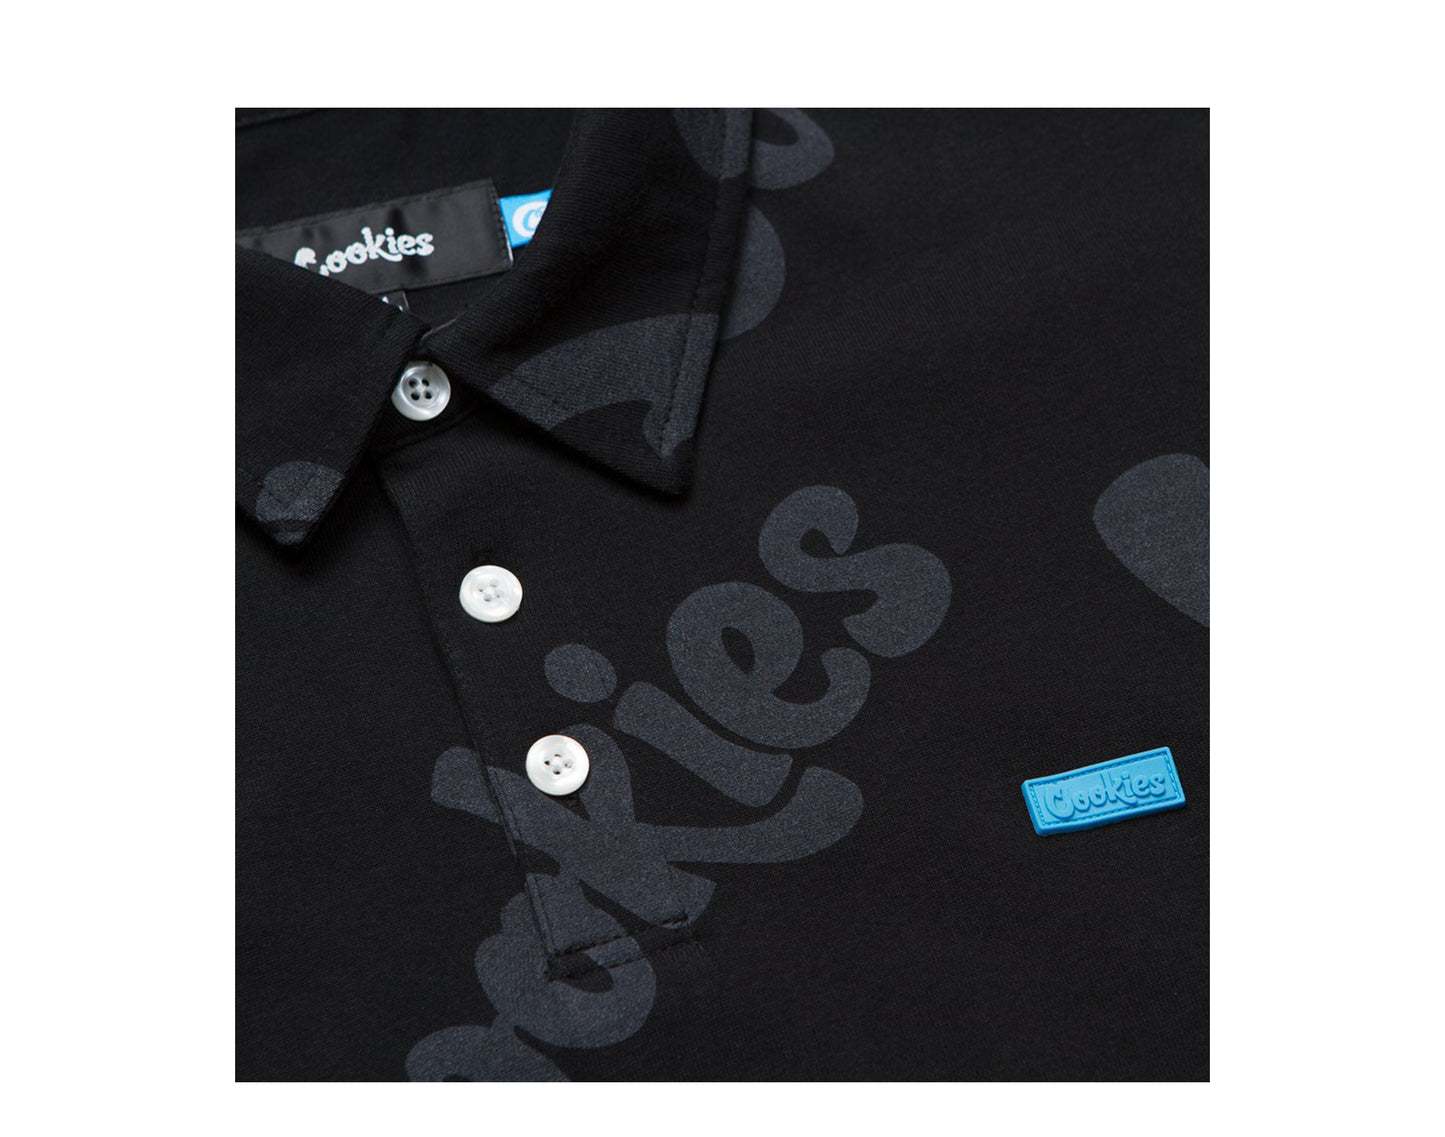 Cookies Floressence Cotton Jersey Repeated Logo Polo Black Shirt 1542K3869-BLK